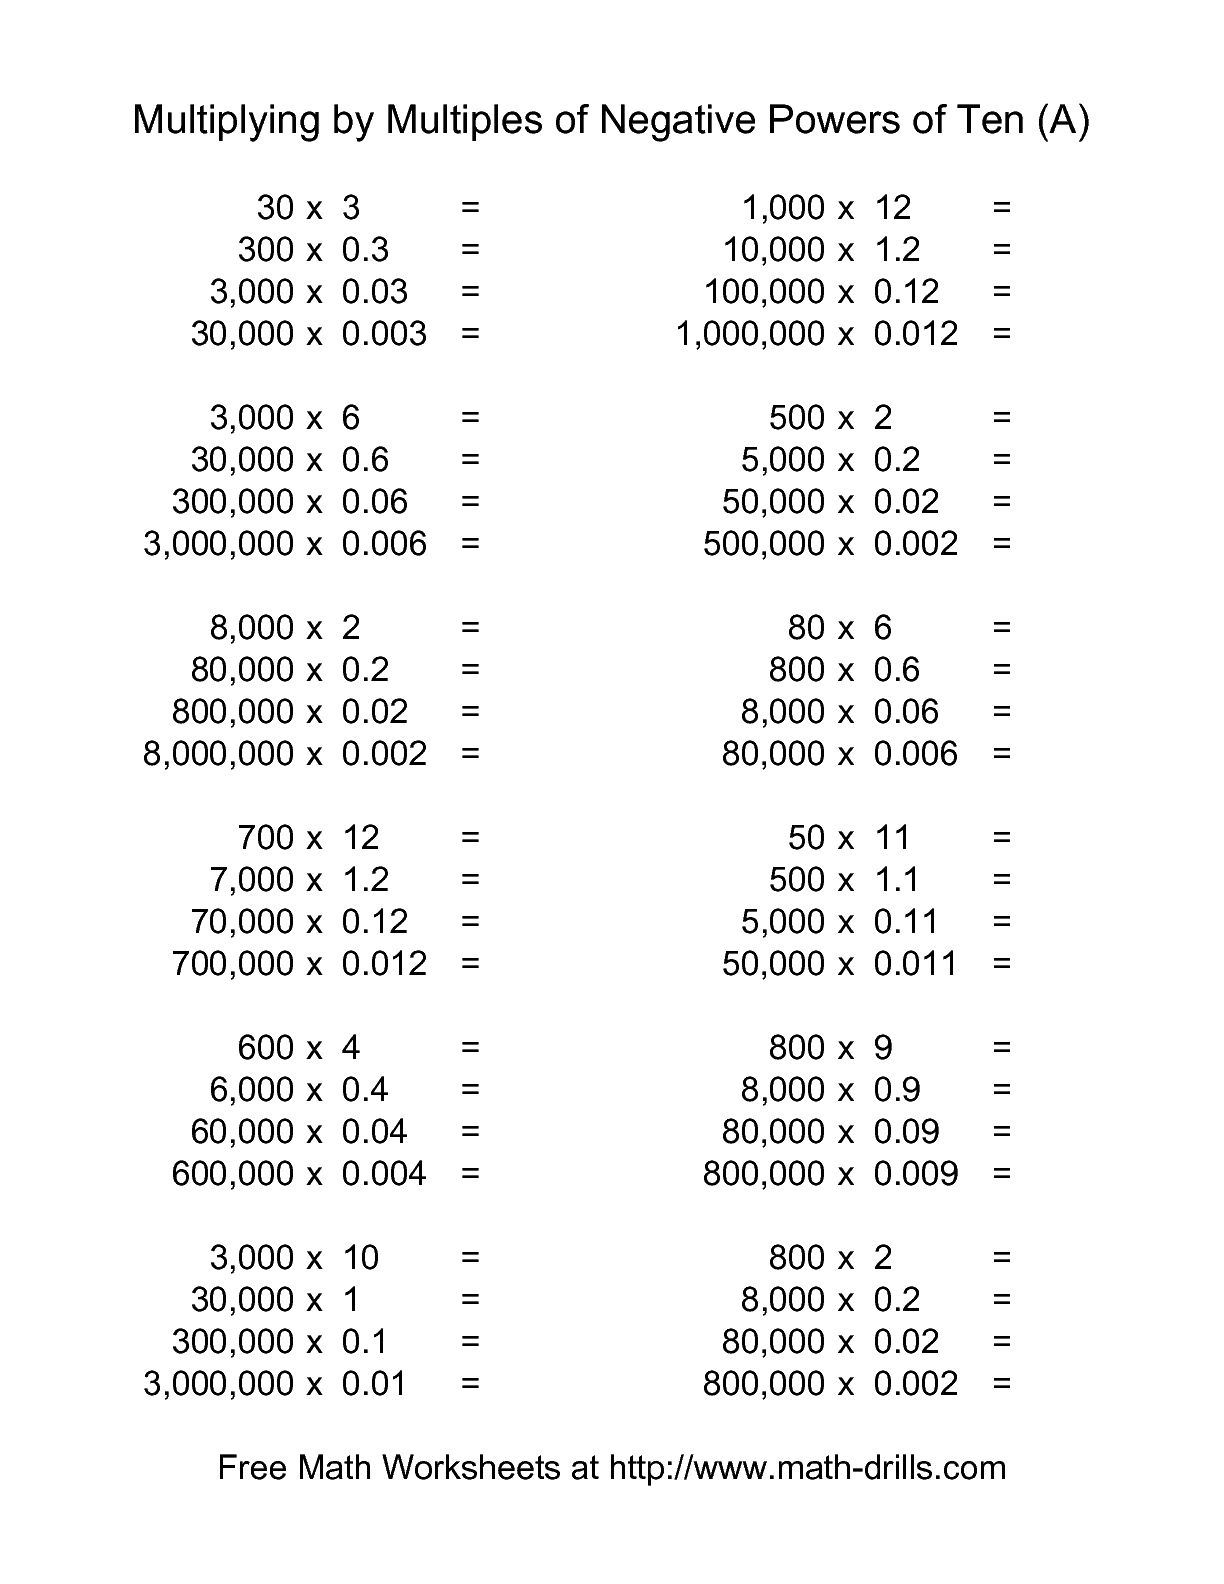 multiplying-whole-numbers-by-powers-of-10-worksheet